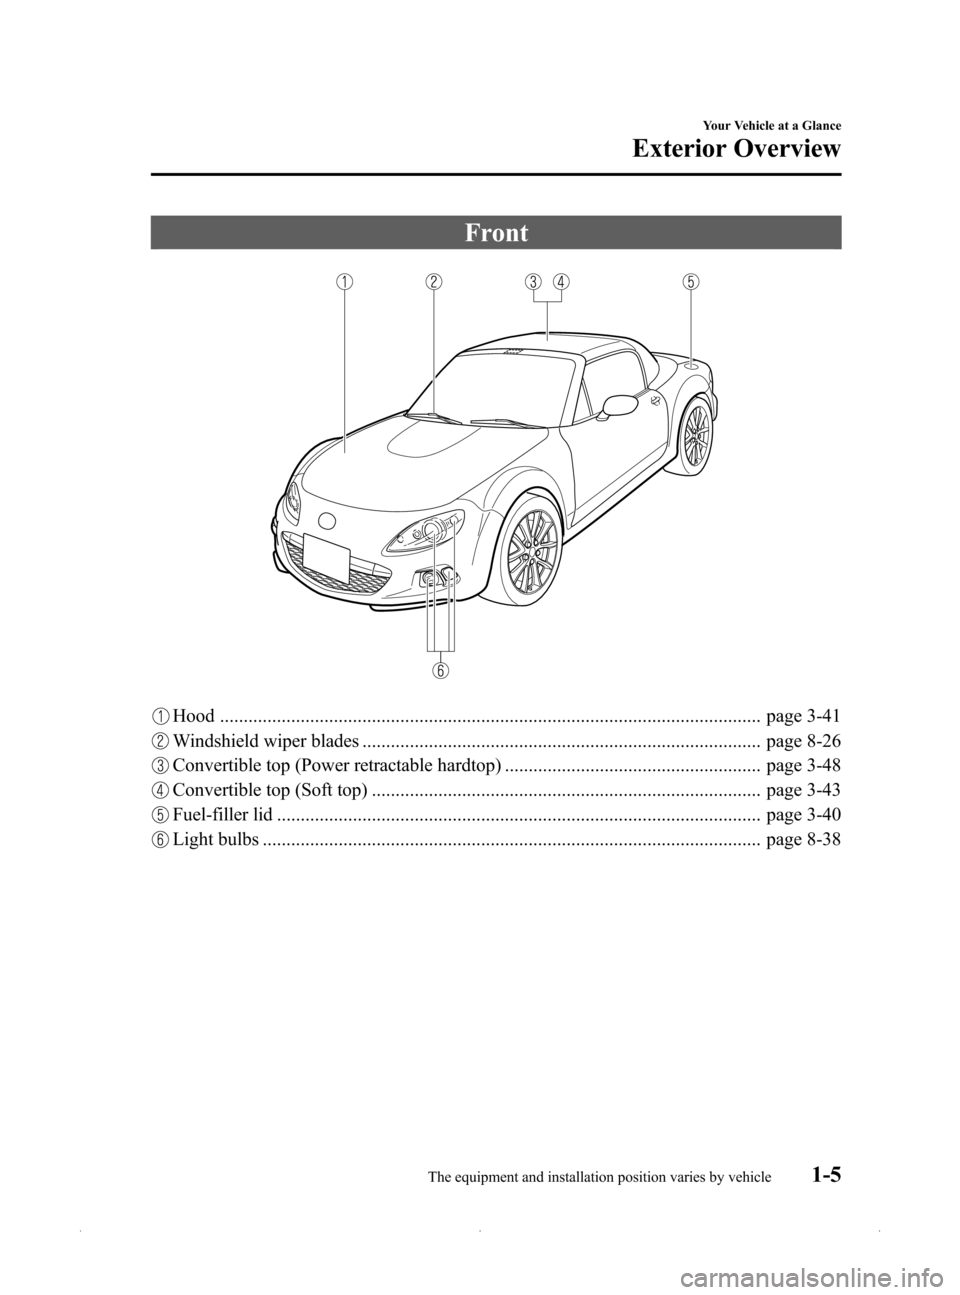 MAZDA MODEL MX-5 2015   (in English) User Guide Black plate (11,1)
Front
Hood .................................................................................................................. page 3-41
Windshield wiper blades .....................